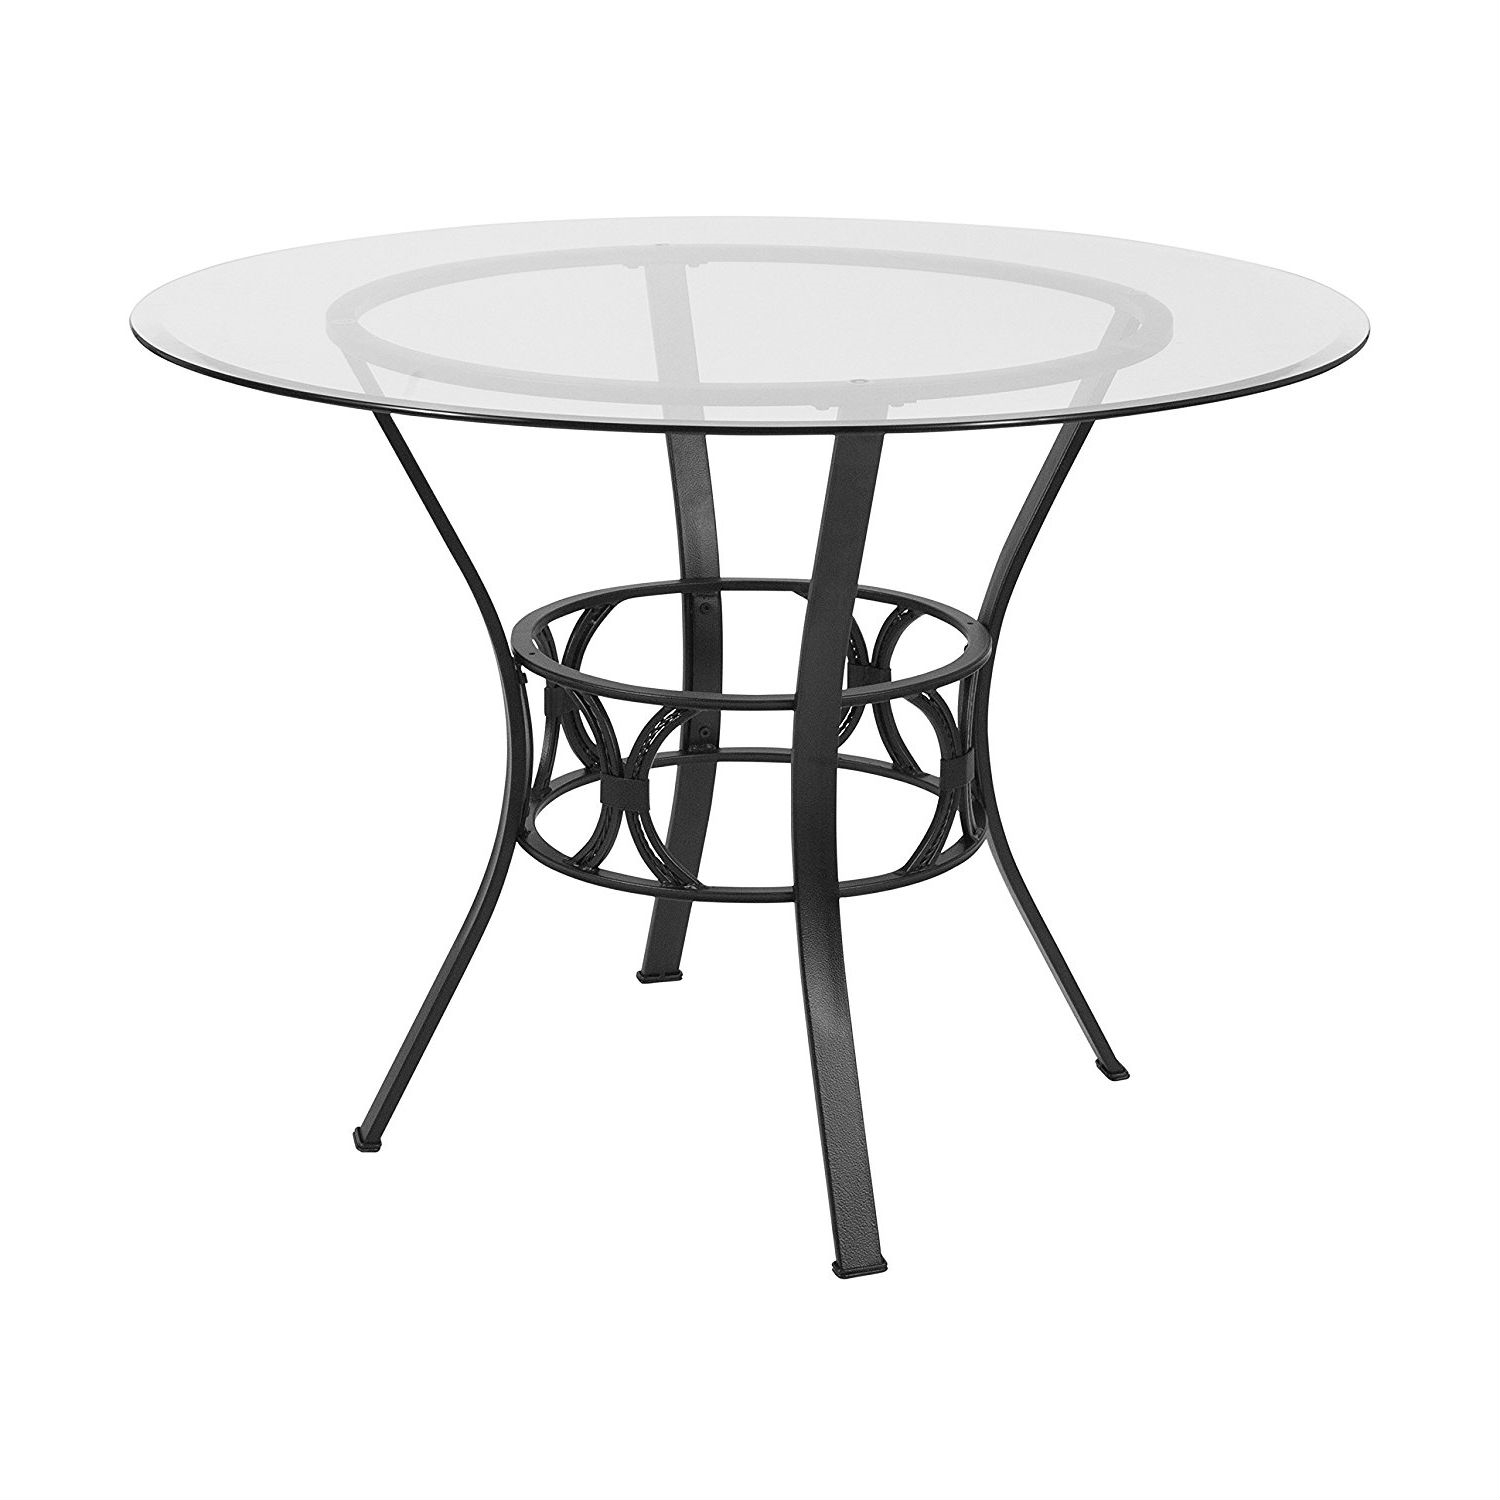 Glass Dining Table With Metal Frame, 42 Inch Round Dining Table Glass